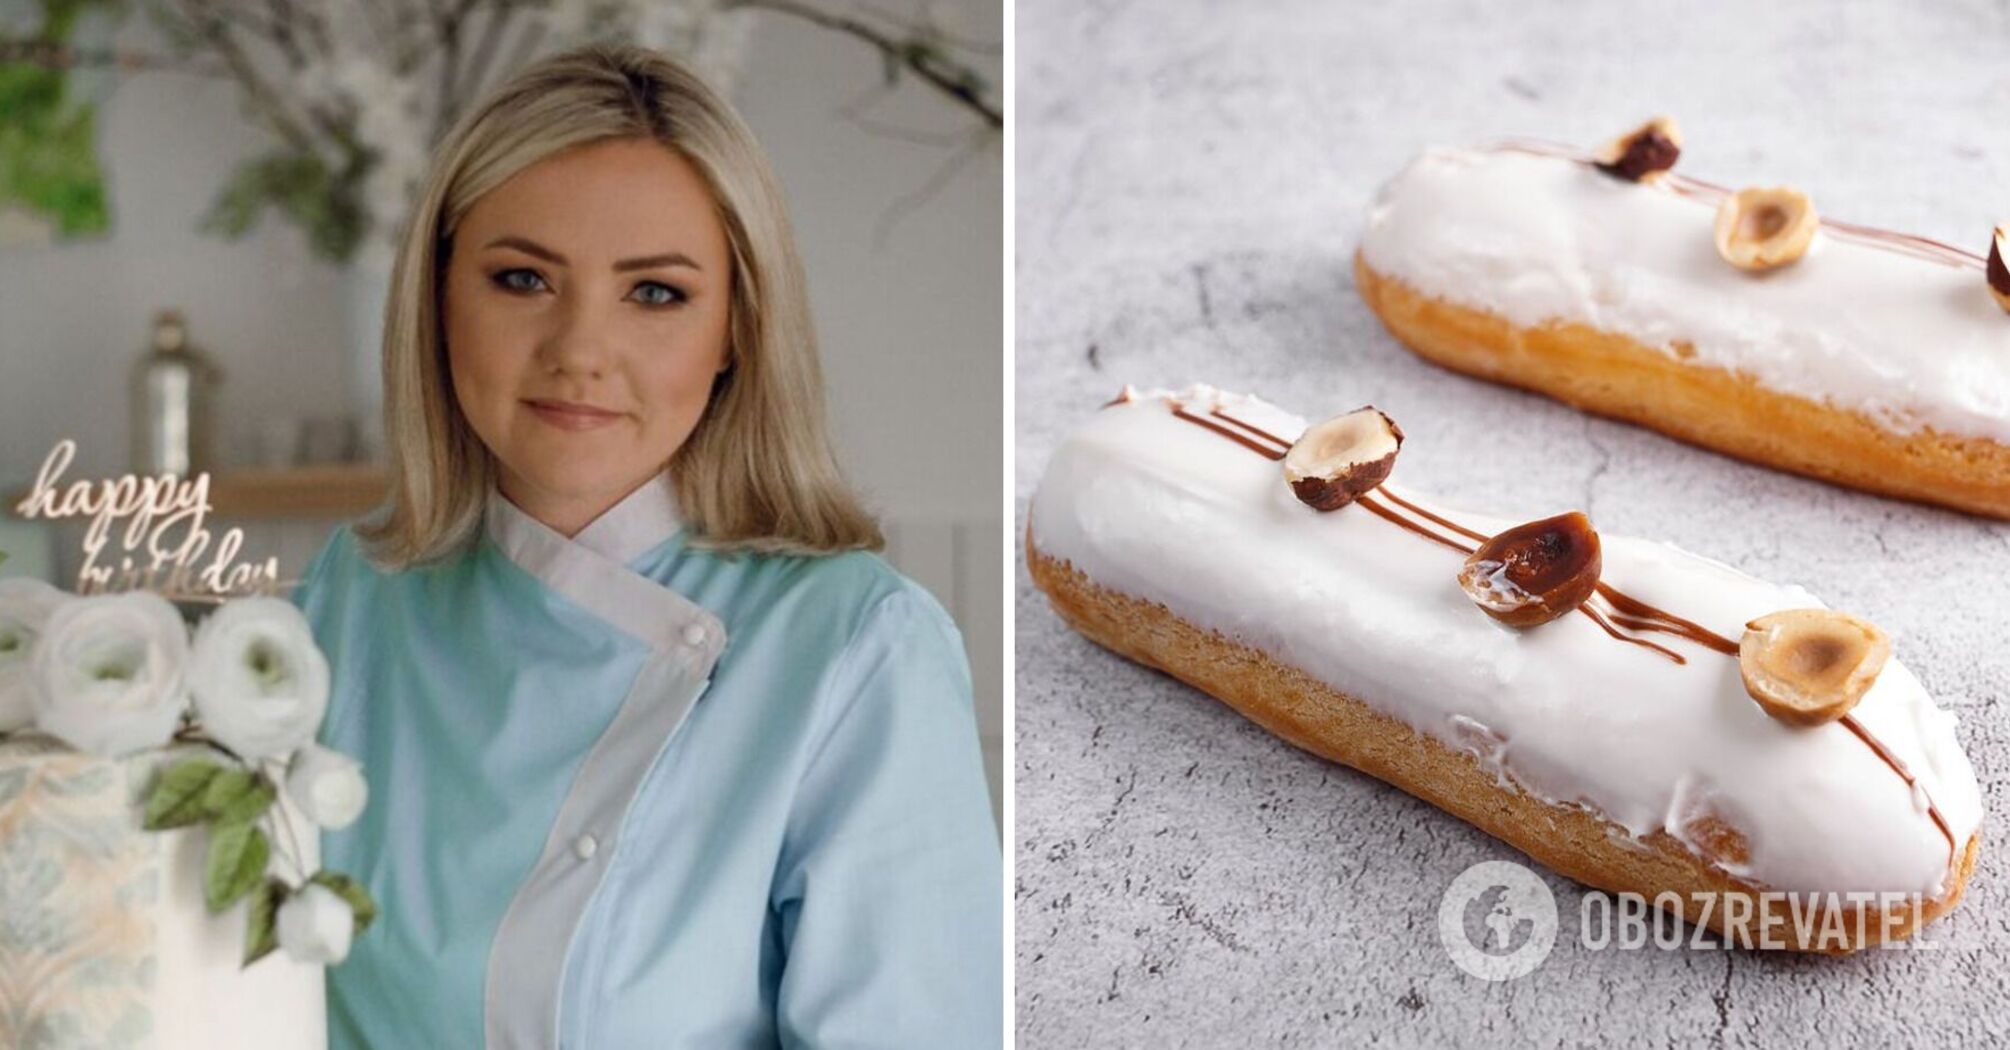 Eclairs with icing for all occasions: an idea shared by Lilia Tsvit